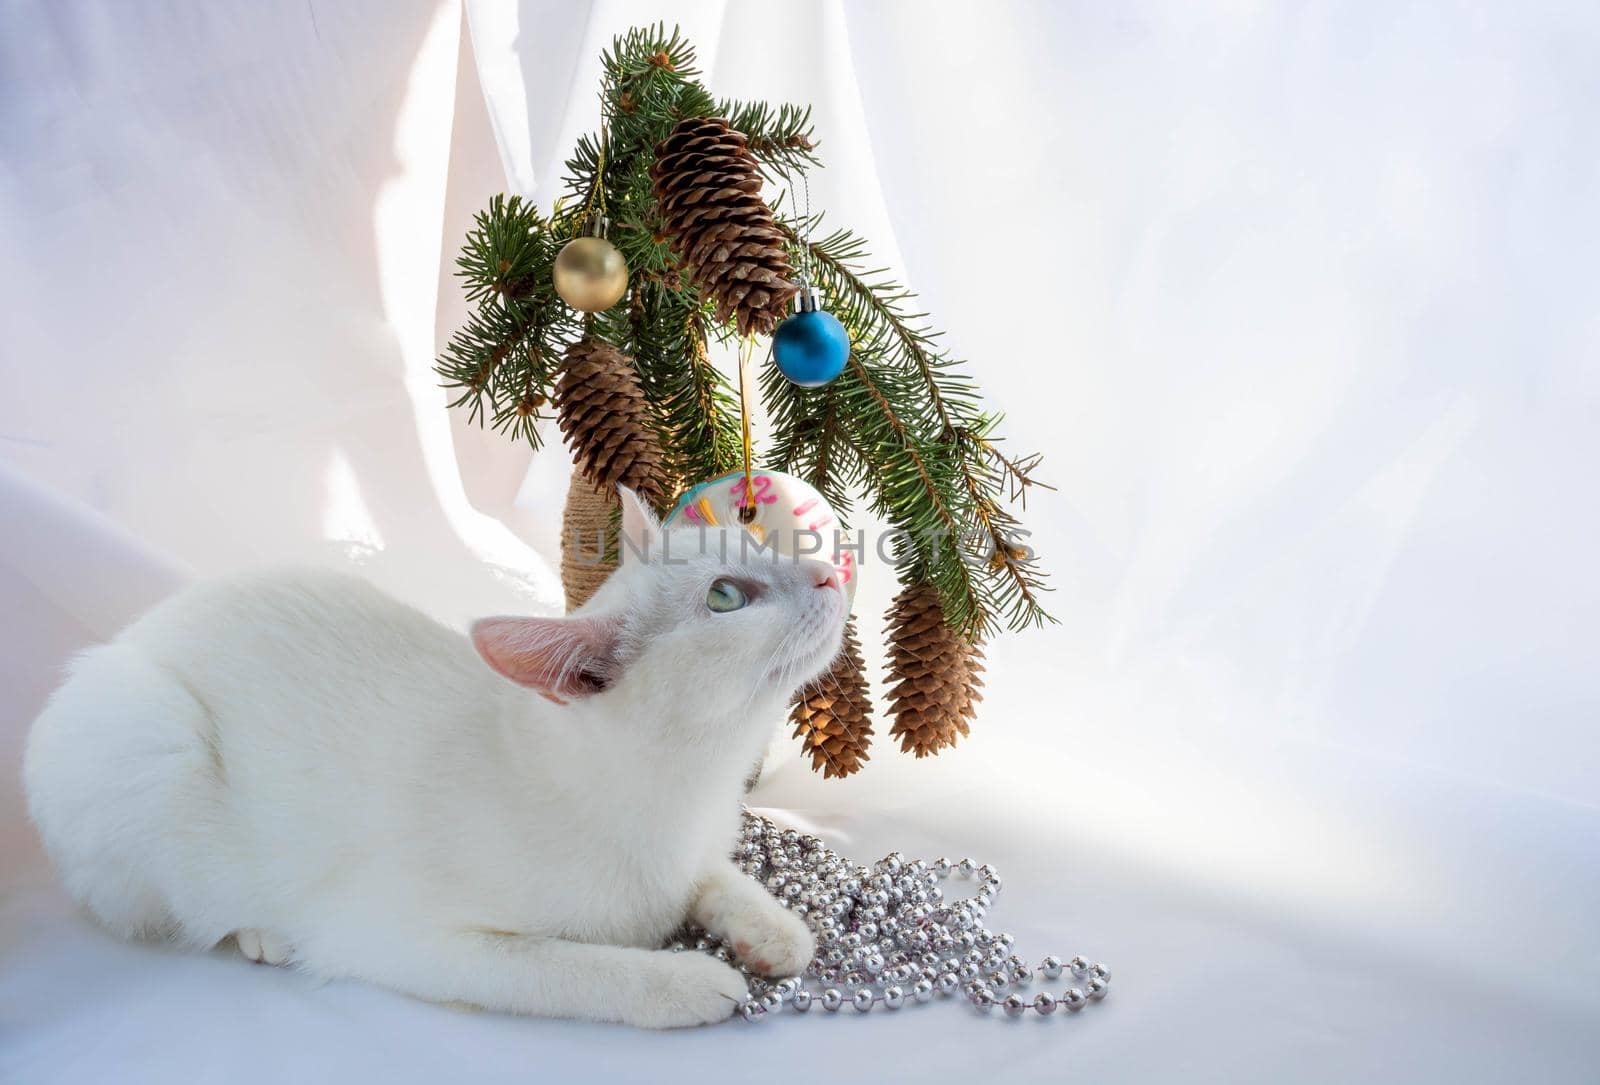 New Year's Eve, 2022.A white curious cat sits next to a Christmas tree bouquet by lapushka62